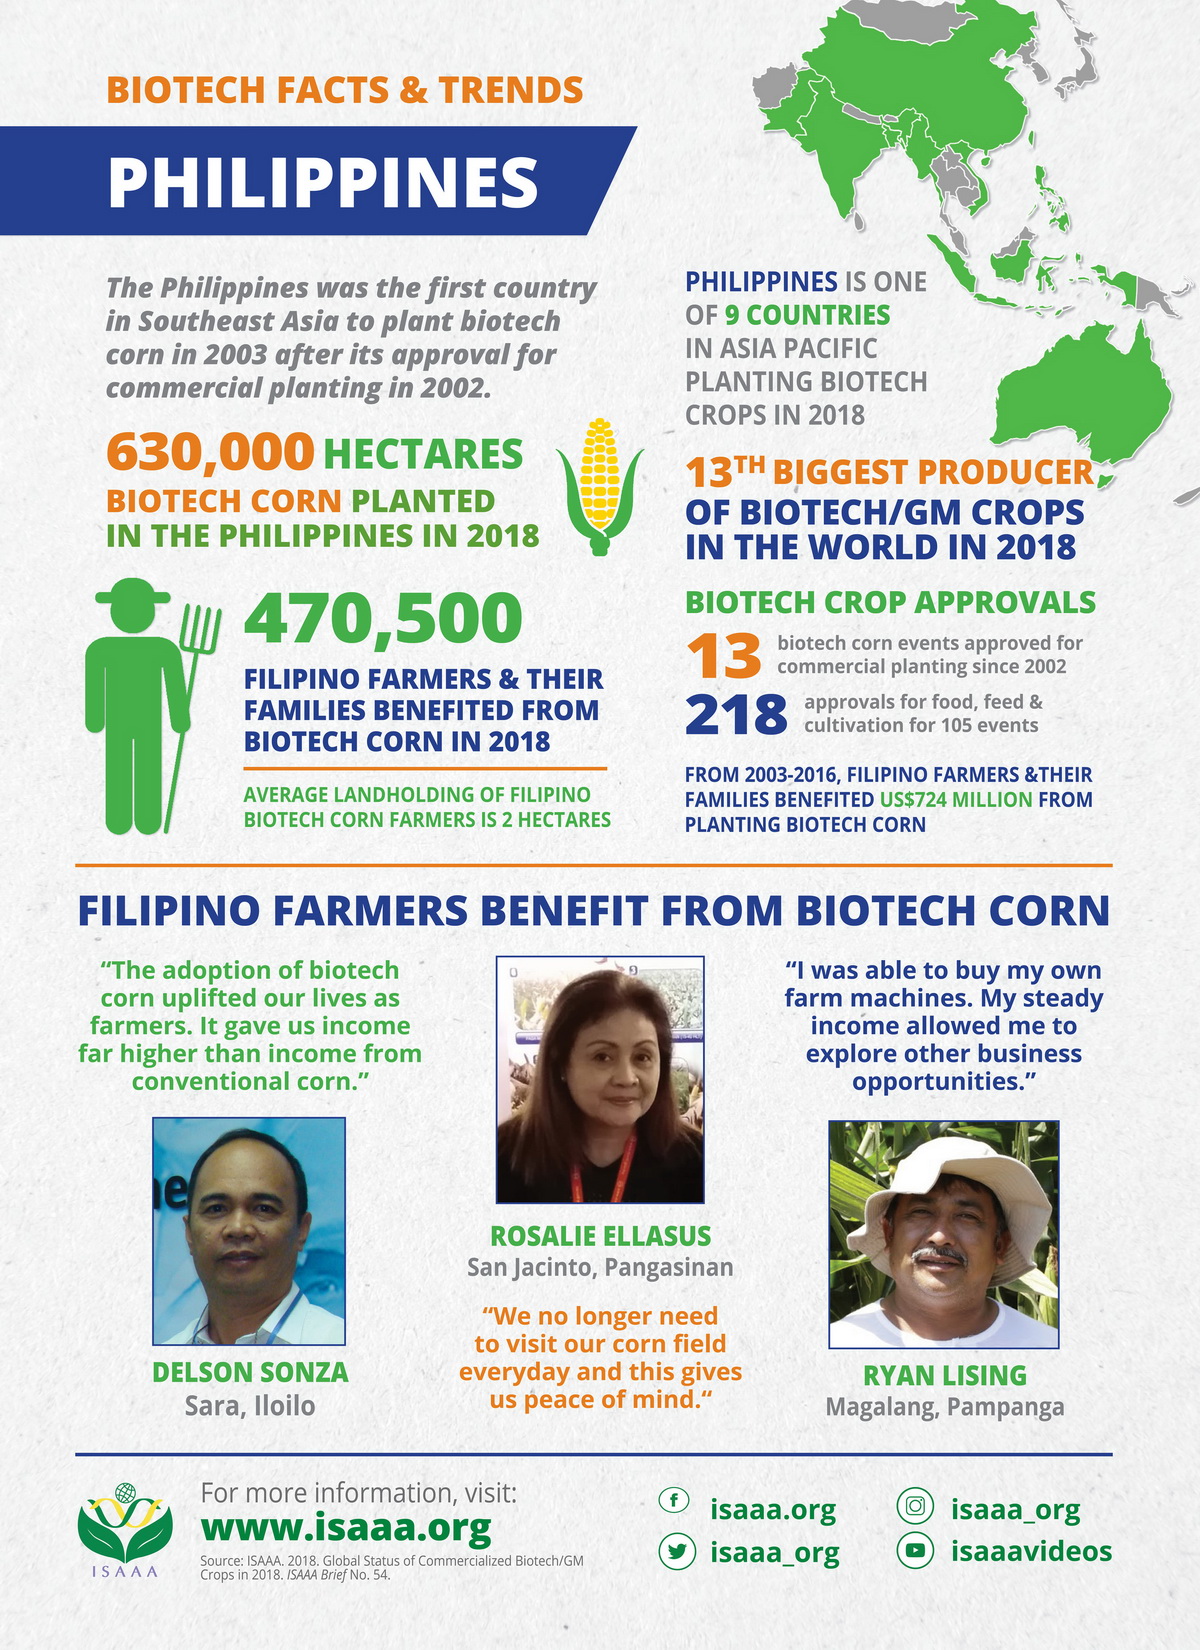 Biotech Facts & Trends: Philippines